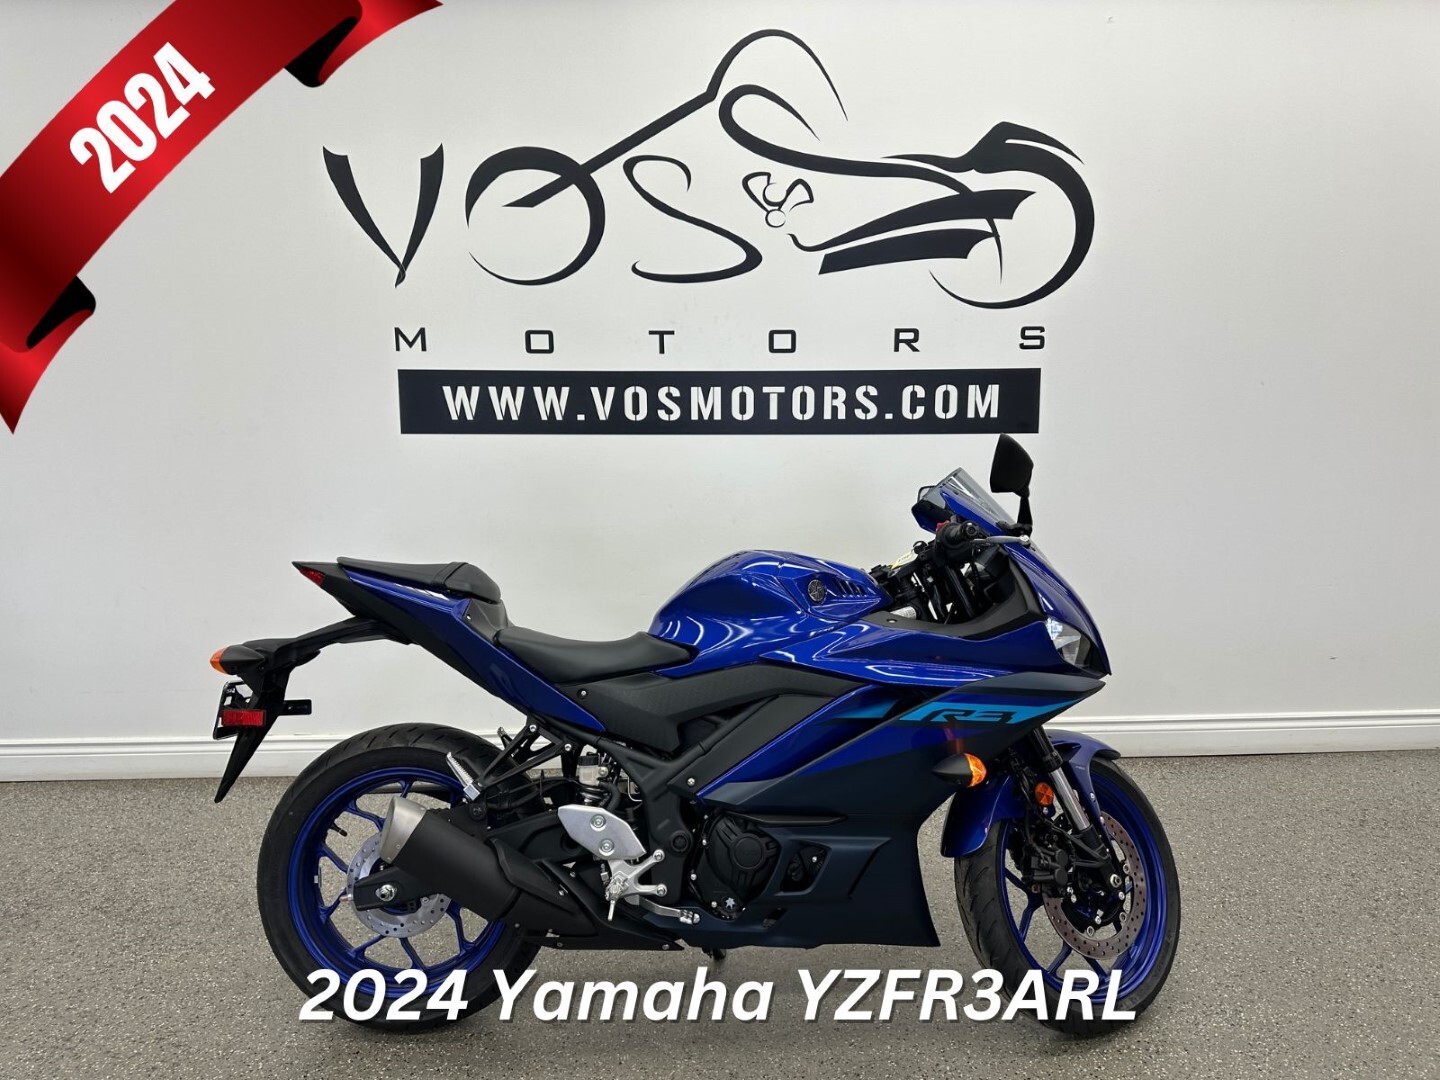 2024 Yamaha YZFR3ARL YZF-R3 - V6054NP - -No Payments for 1 Year**